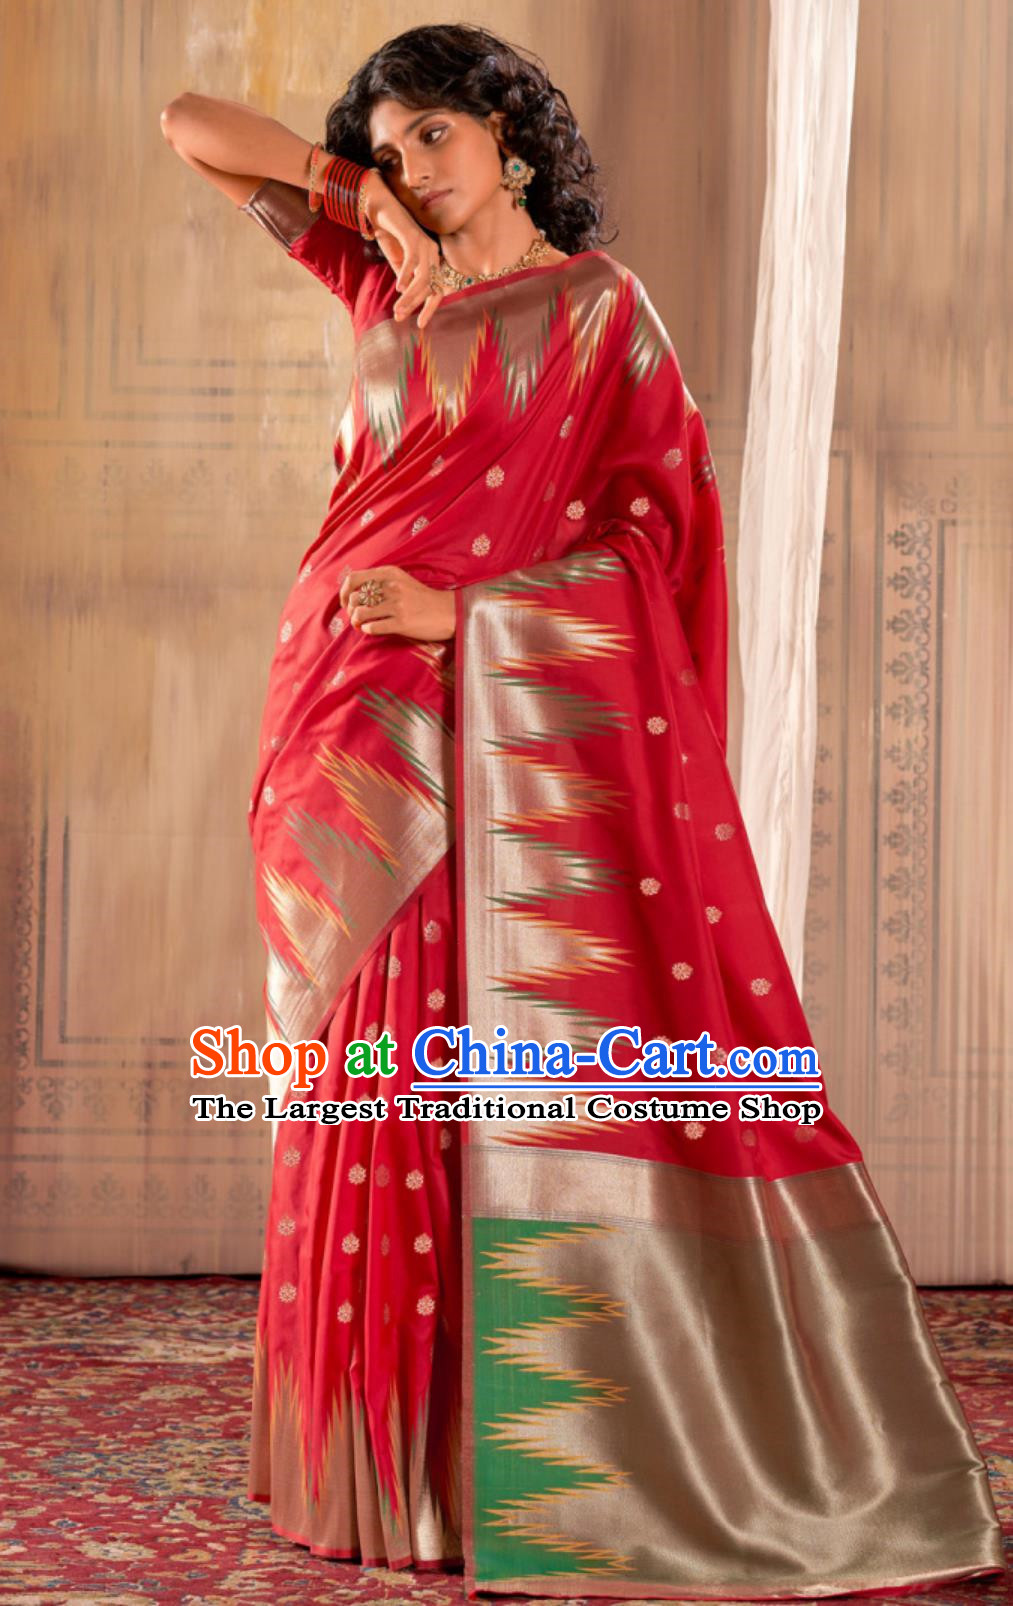 India Court Fashion National Clothing Traditional Indian Women Red Sari Dress